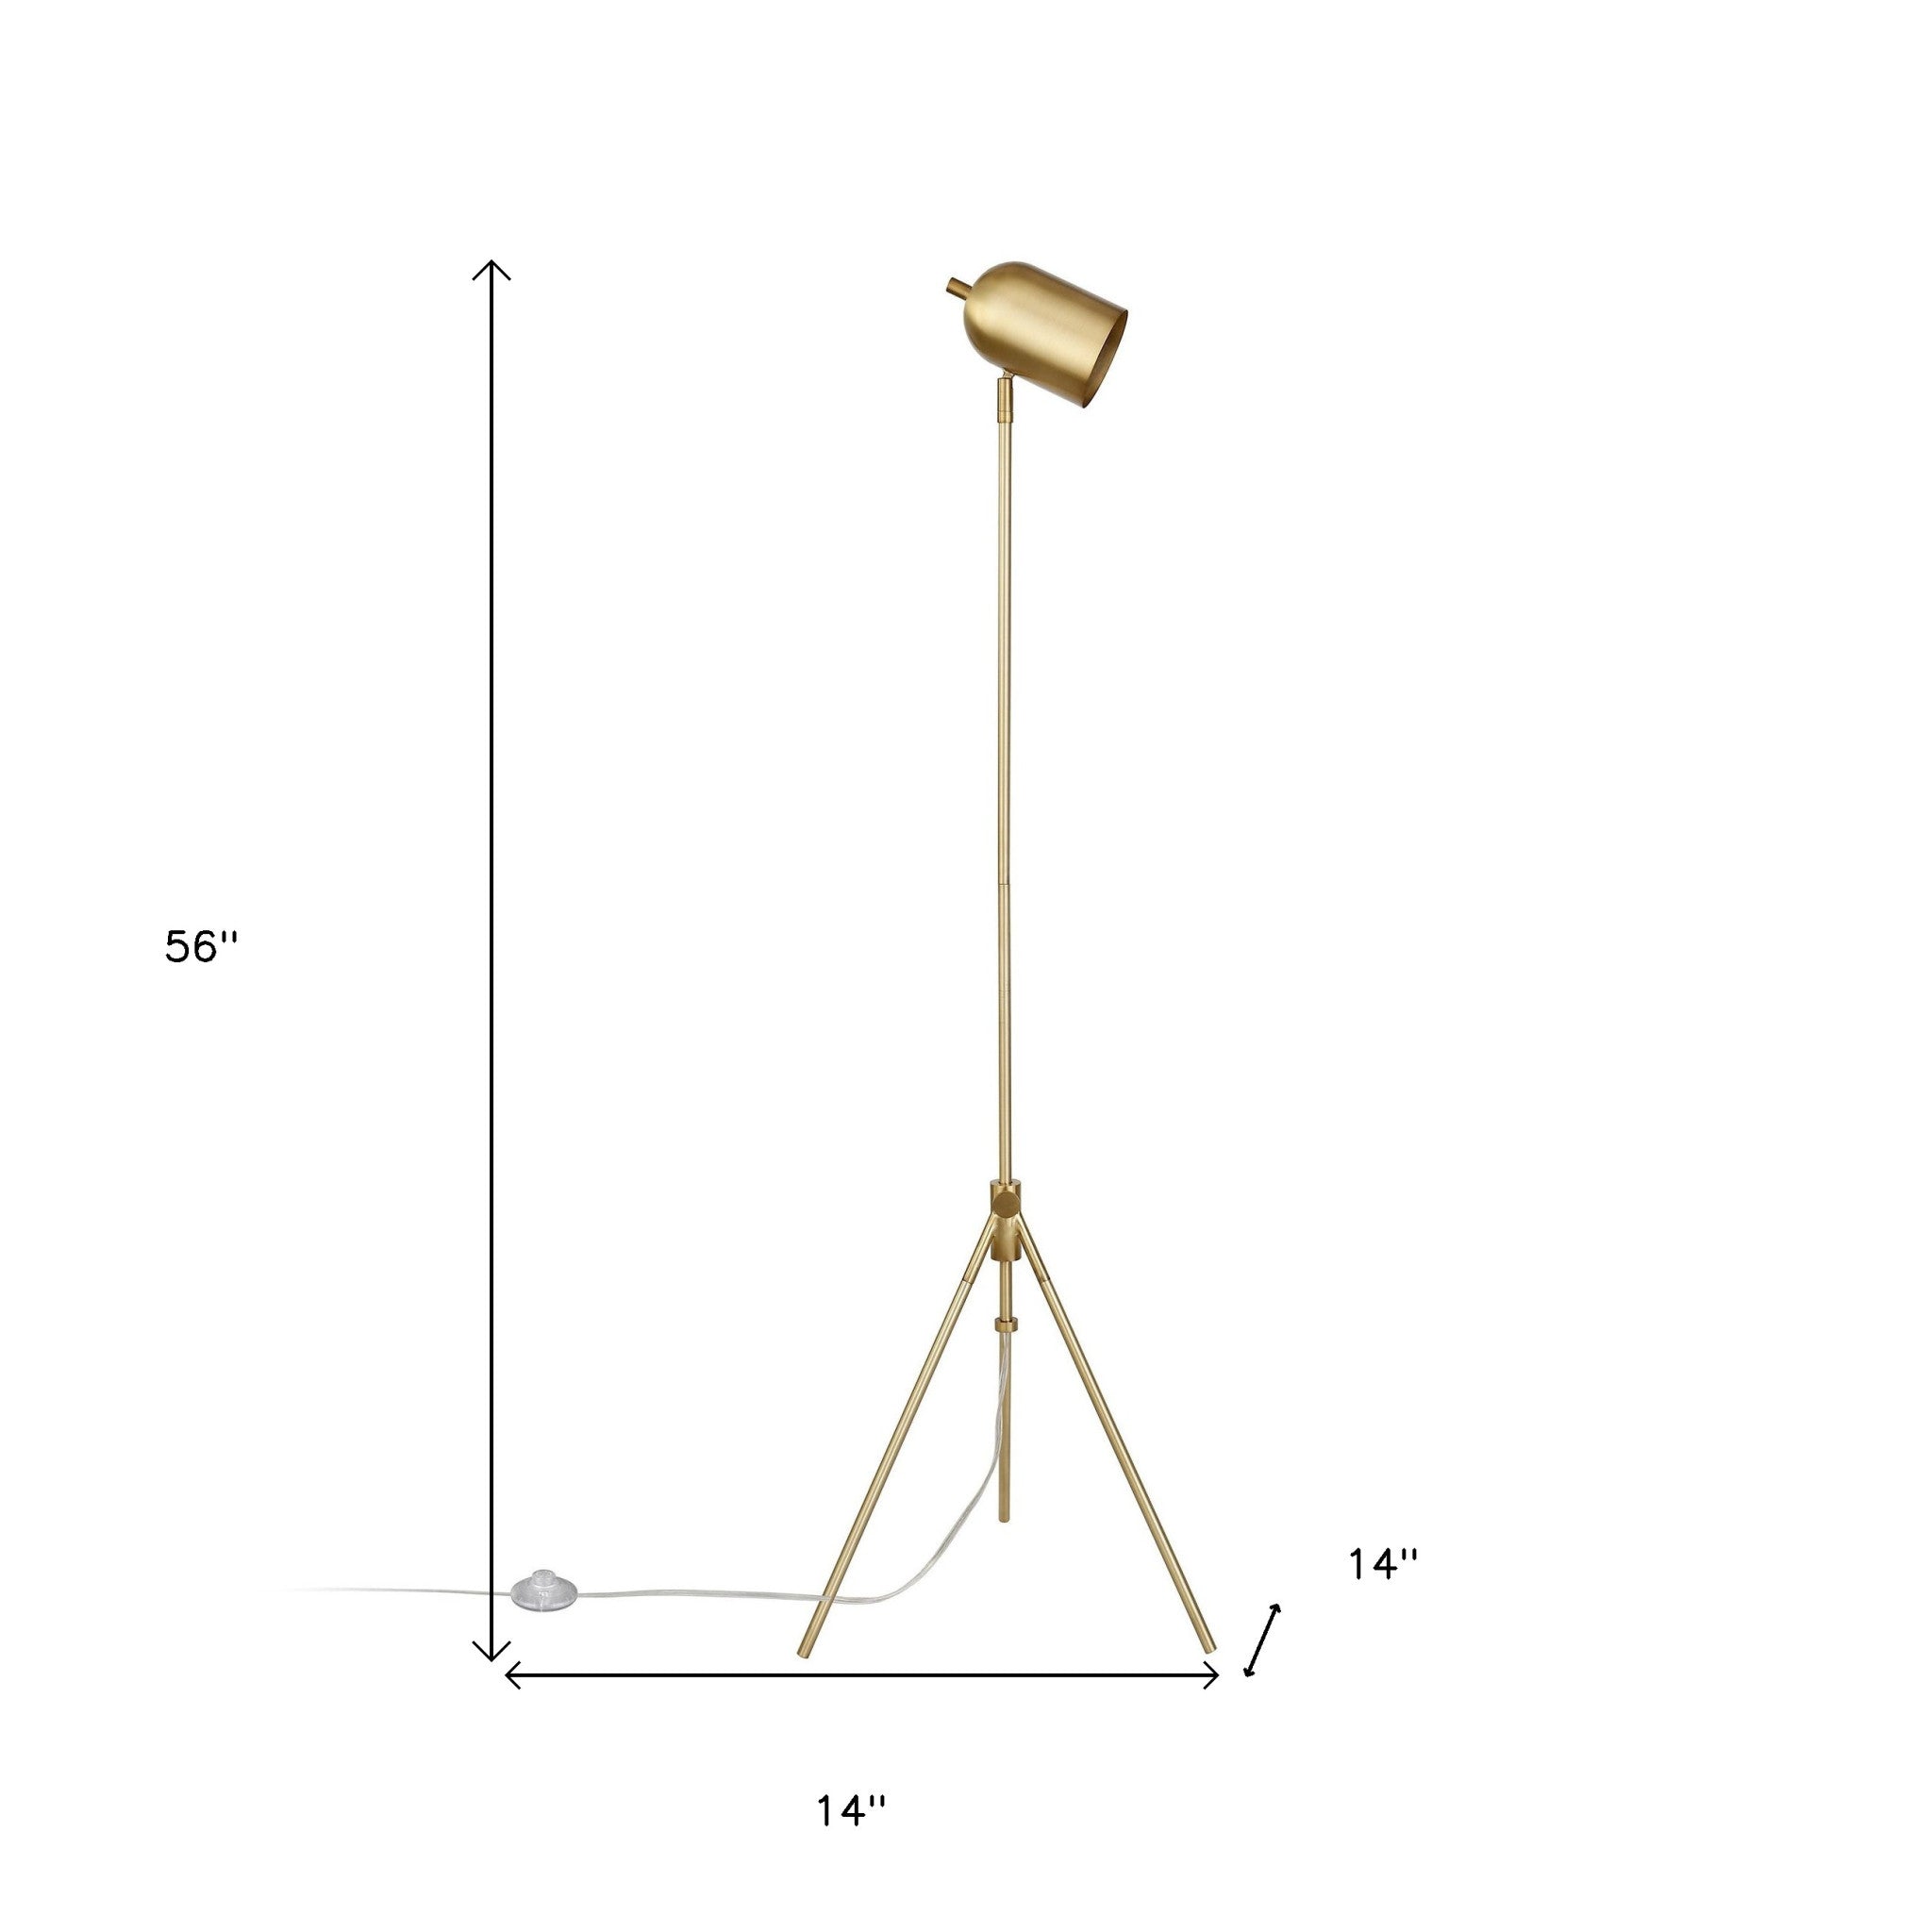 56" Brass Tripod Floor Lamp With Brass Dome Shade